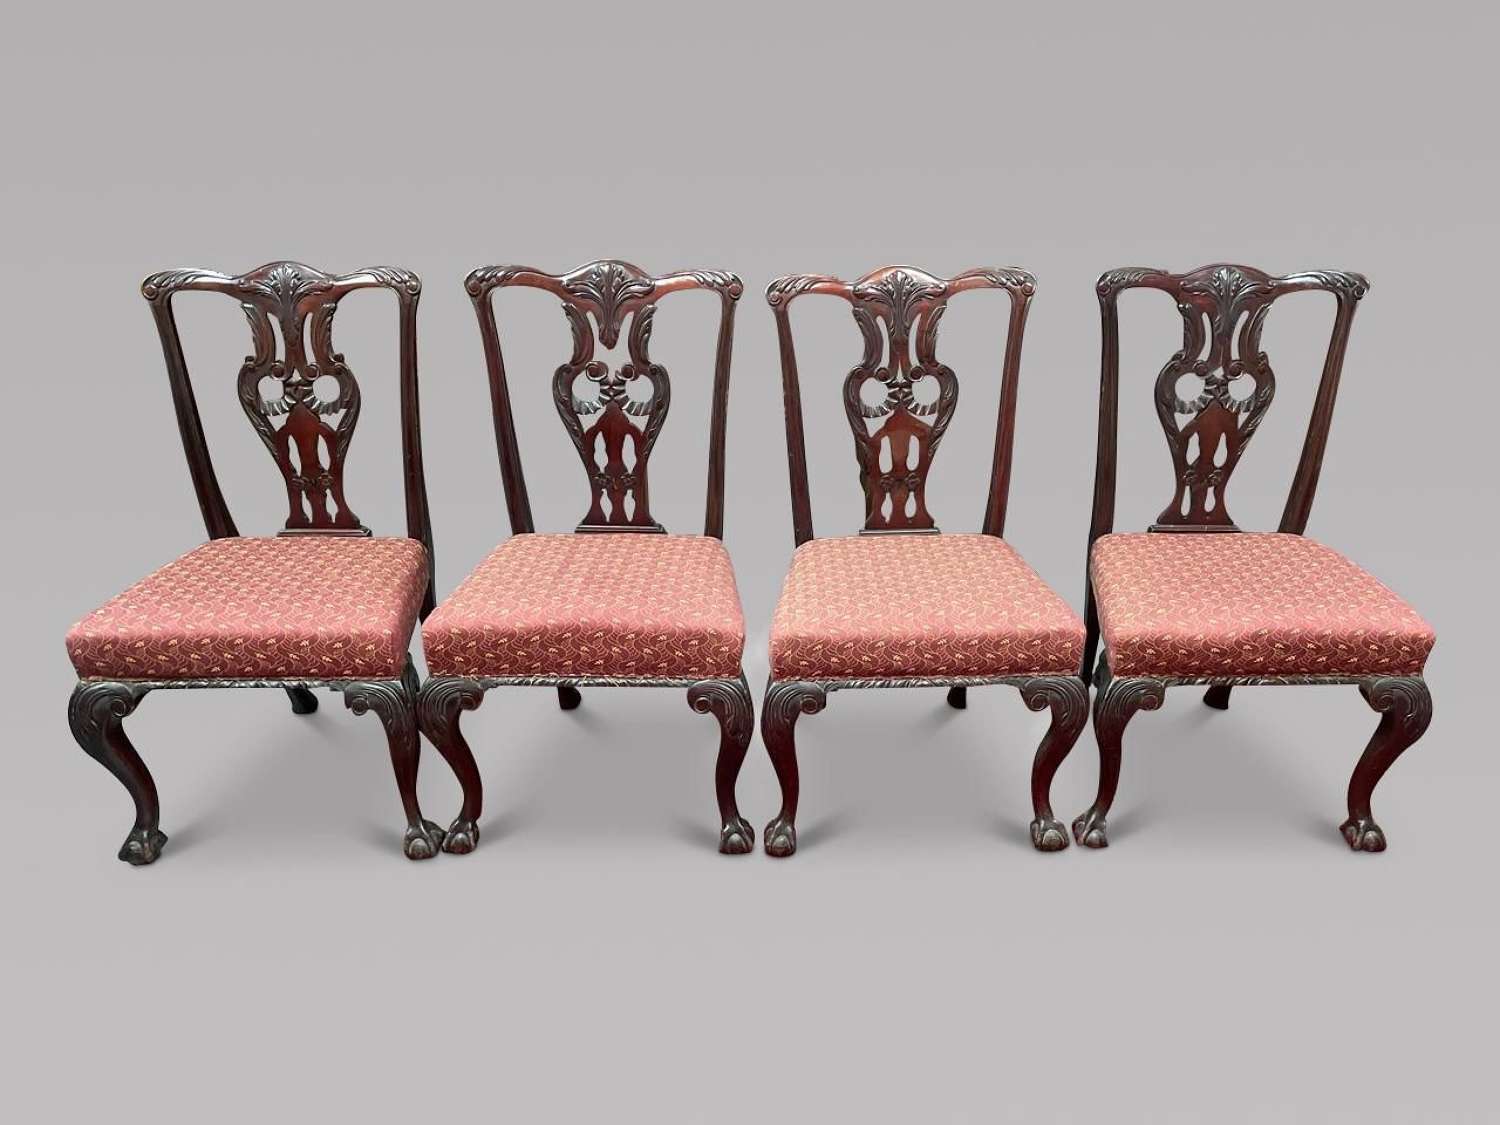 Set of Four 19th Century Chippendale Style Chairs